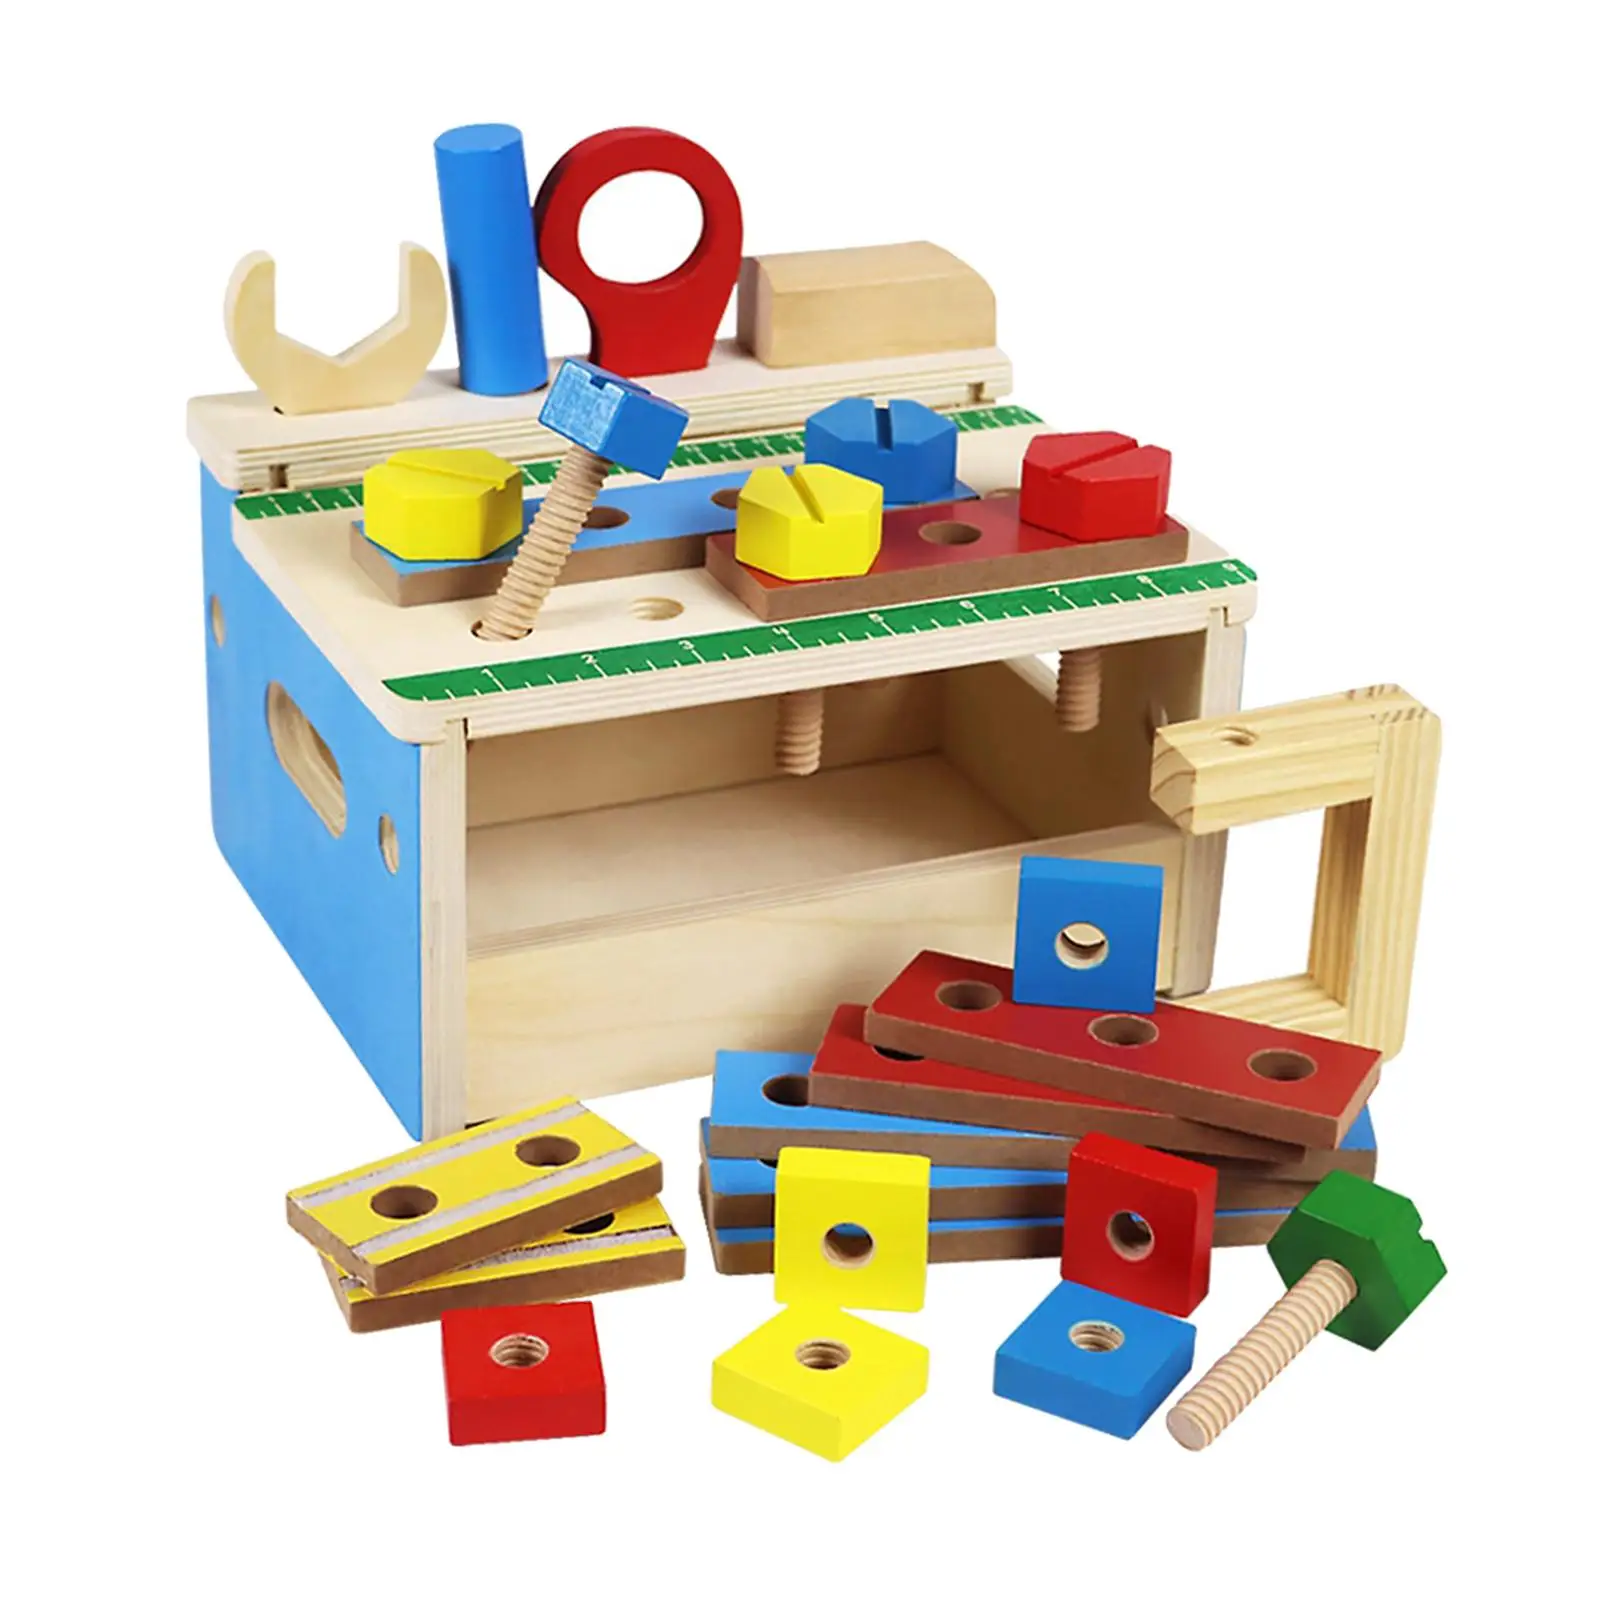 27Pcs Tool Kit Toy Learning Educational Toy Wooden Construction Toy Screw Disassembly Toy Tool for Children Kids Toddler